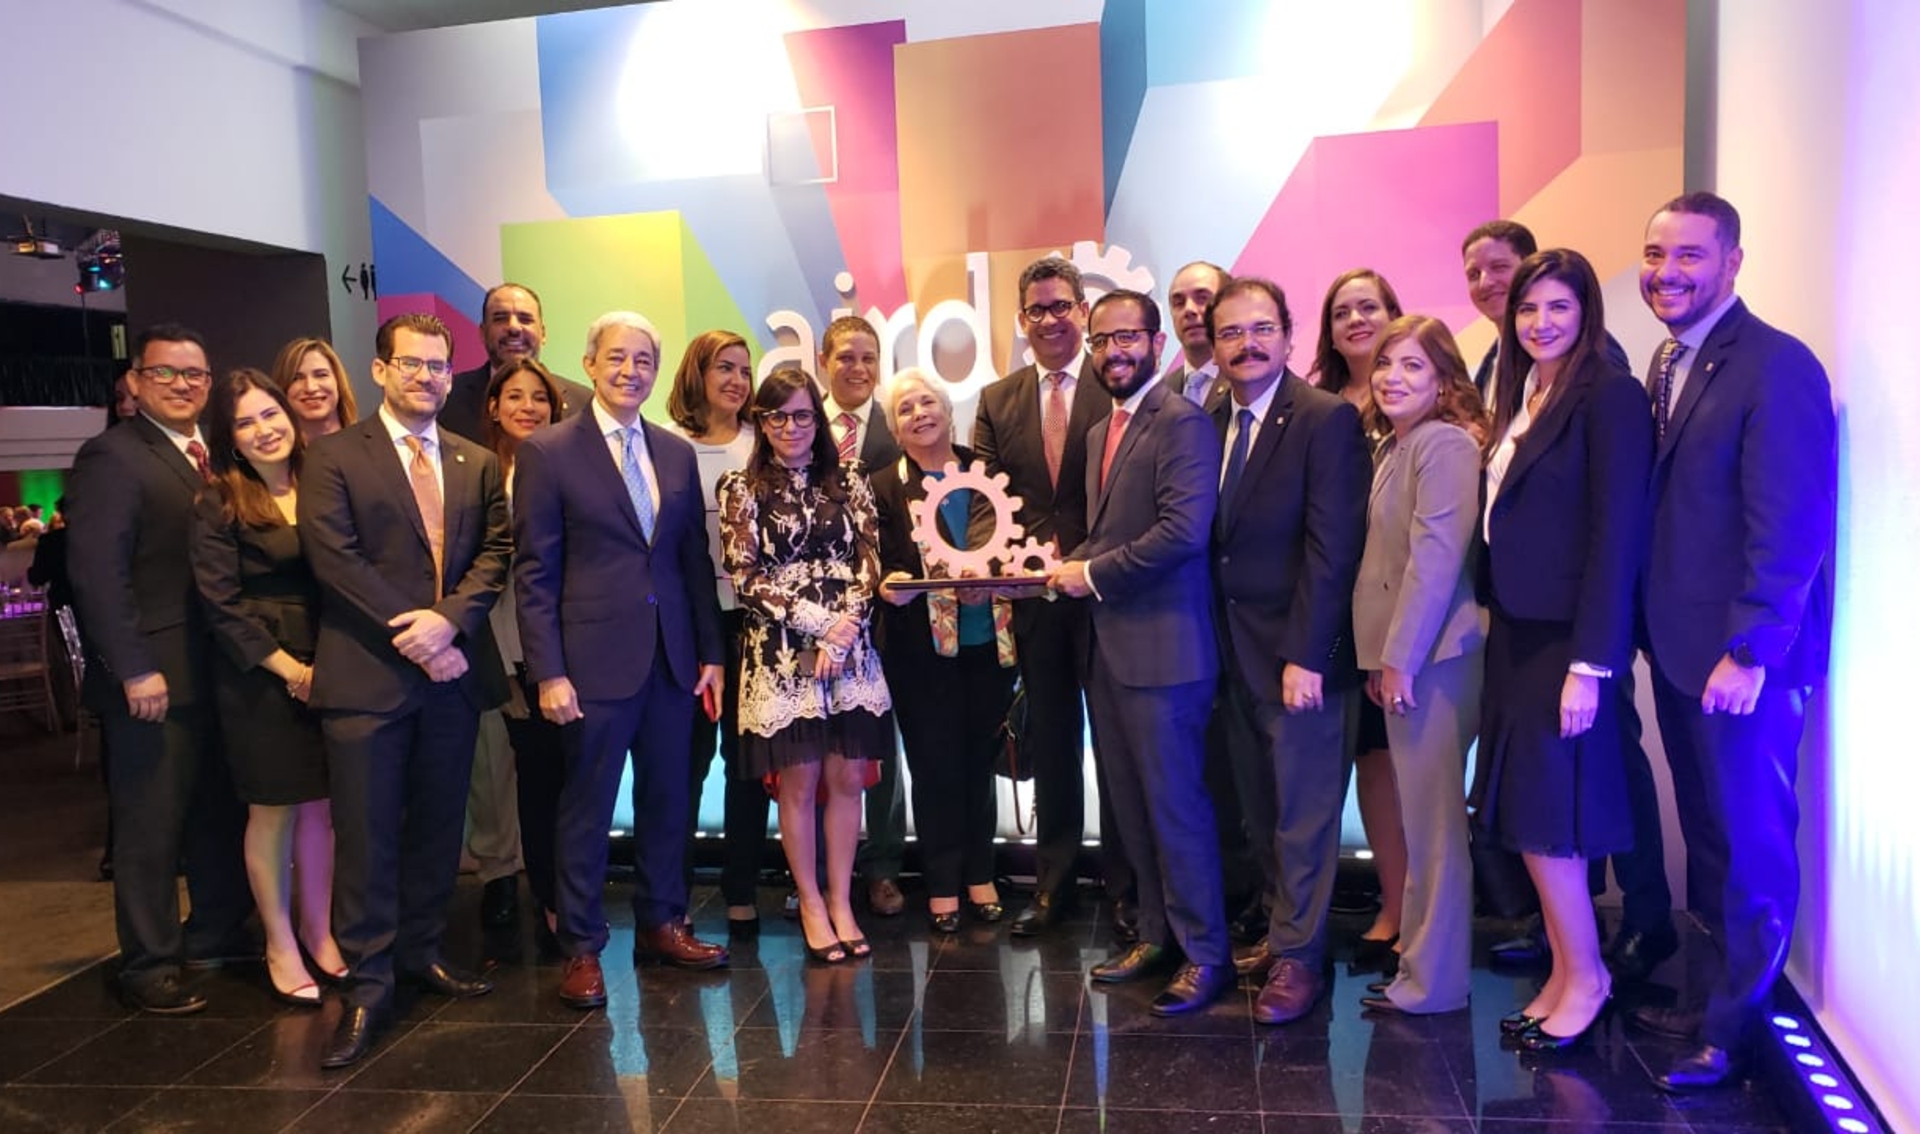 Casa Brugal was recognised for its contribution to the development of the Dominican Republic by becoming the first company to receive the National Dominican Industry Award.